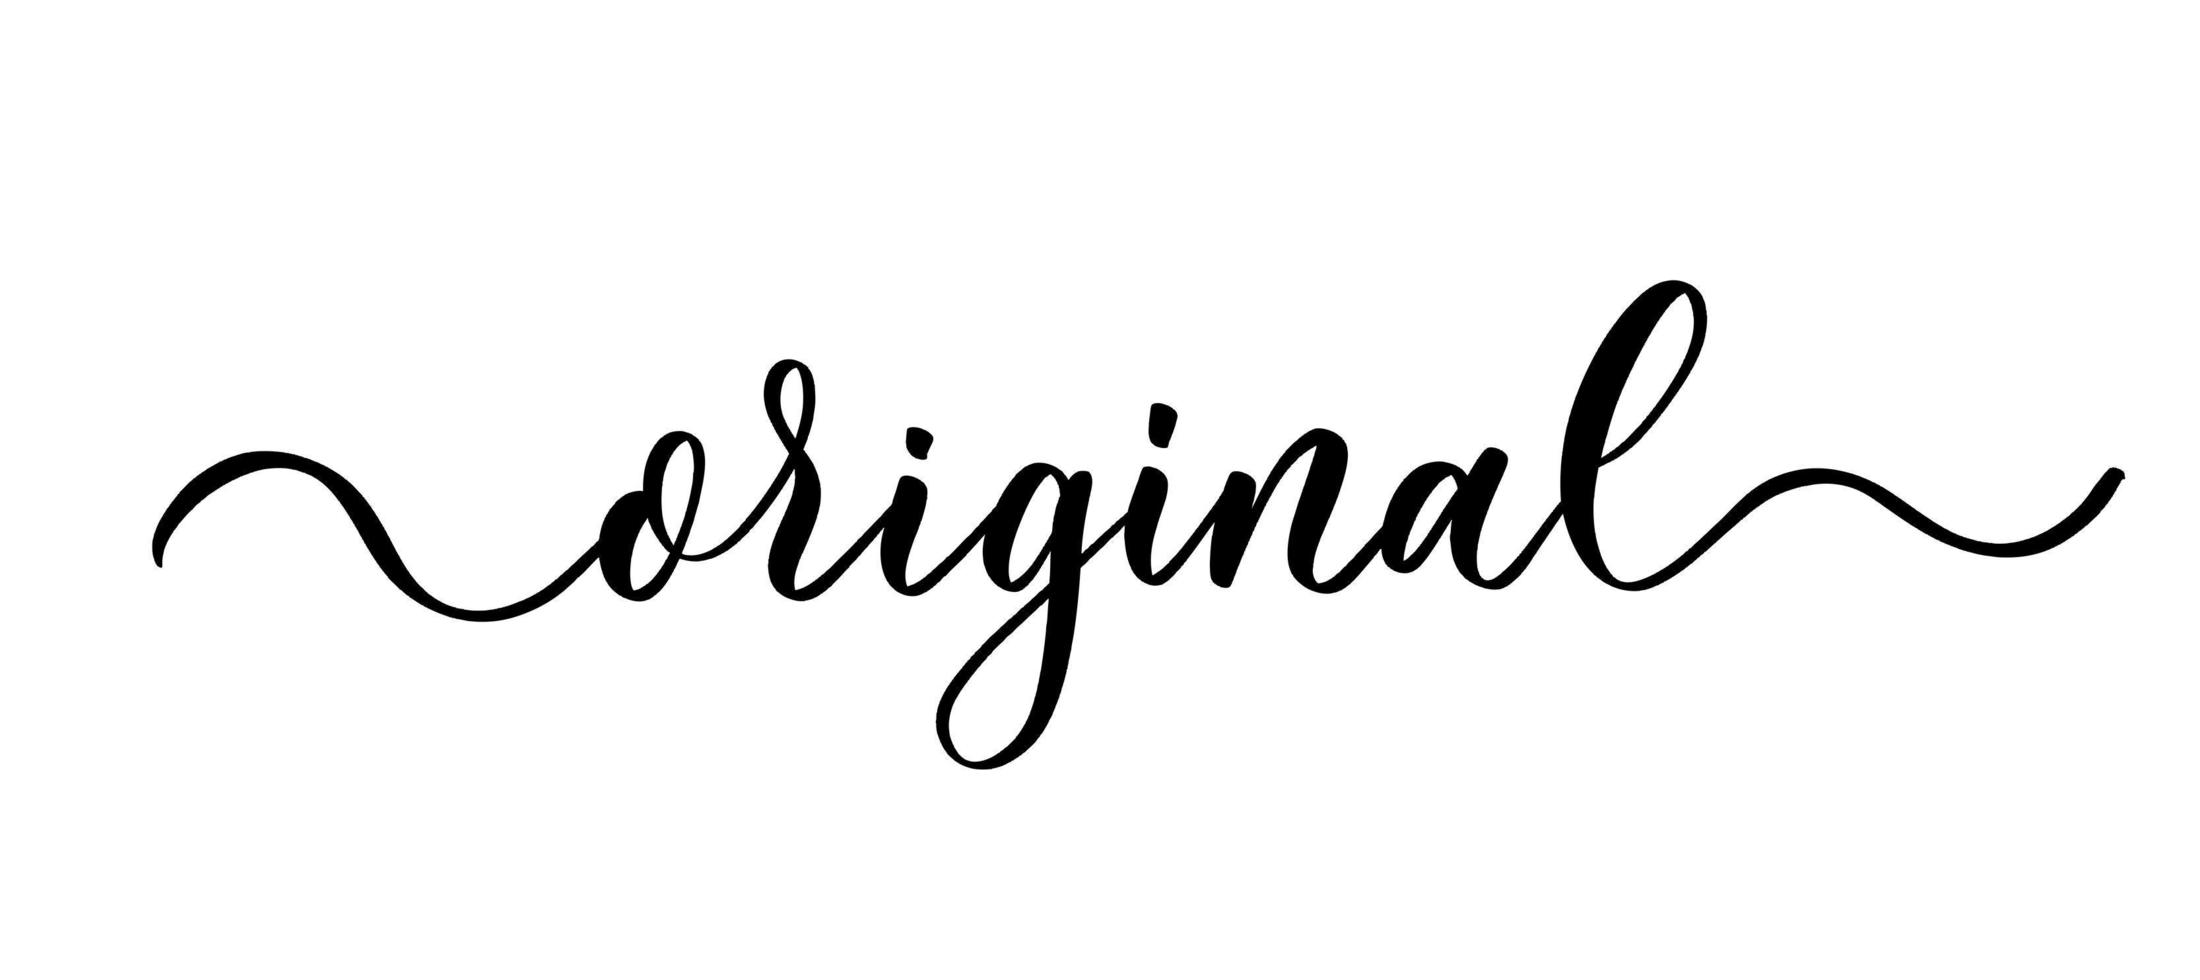 Original - vector calligraphic inscription with smooth lines.